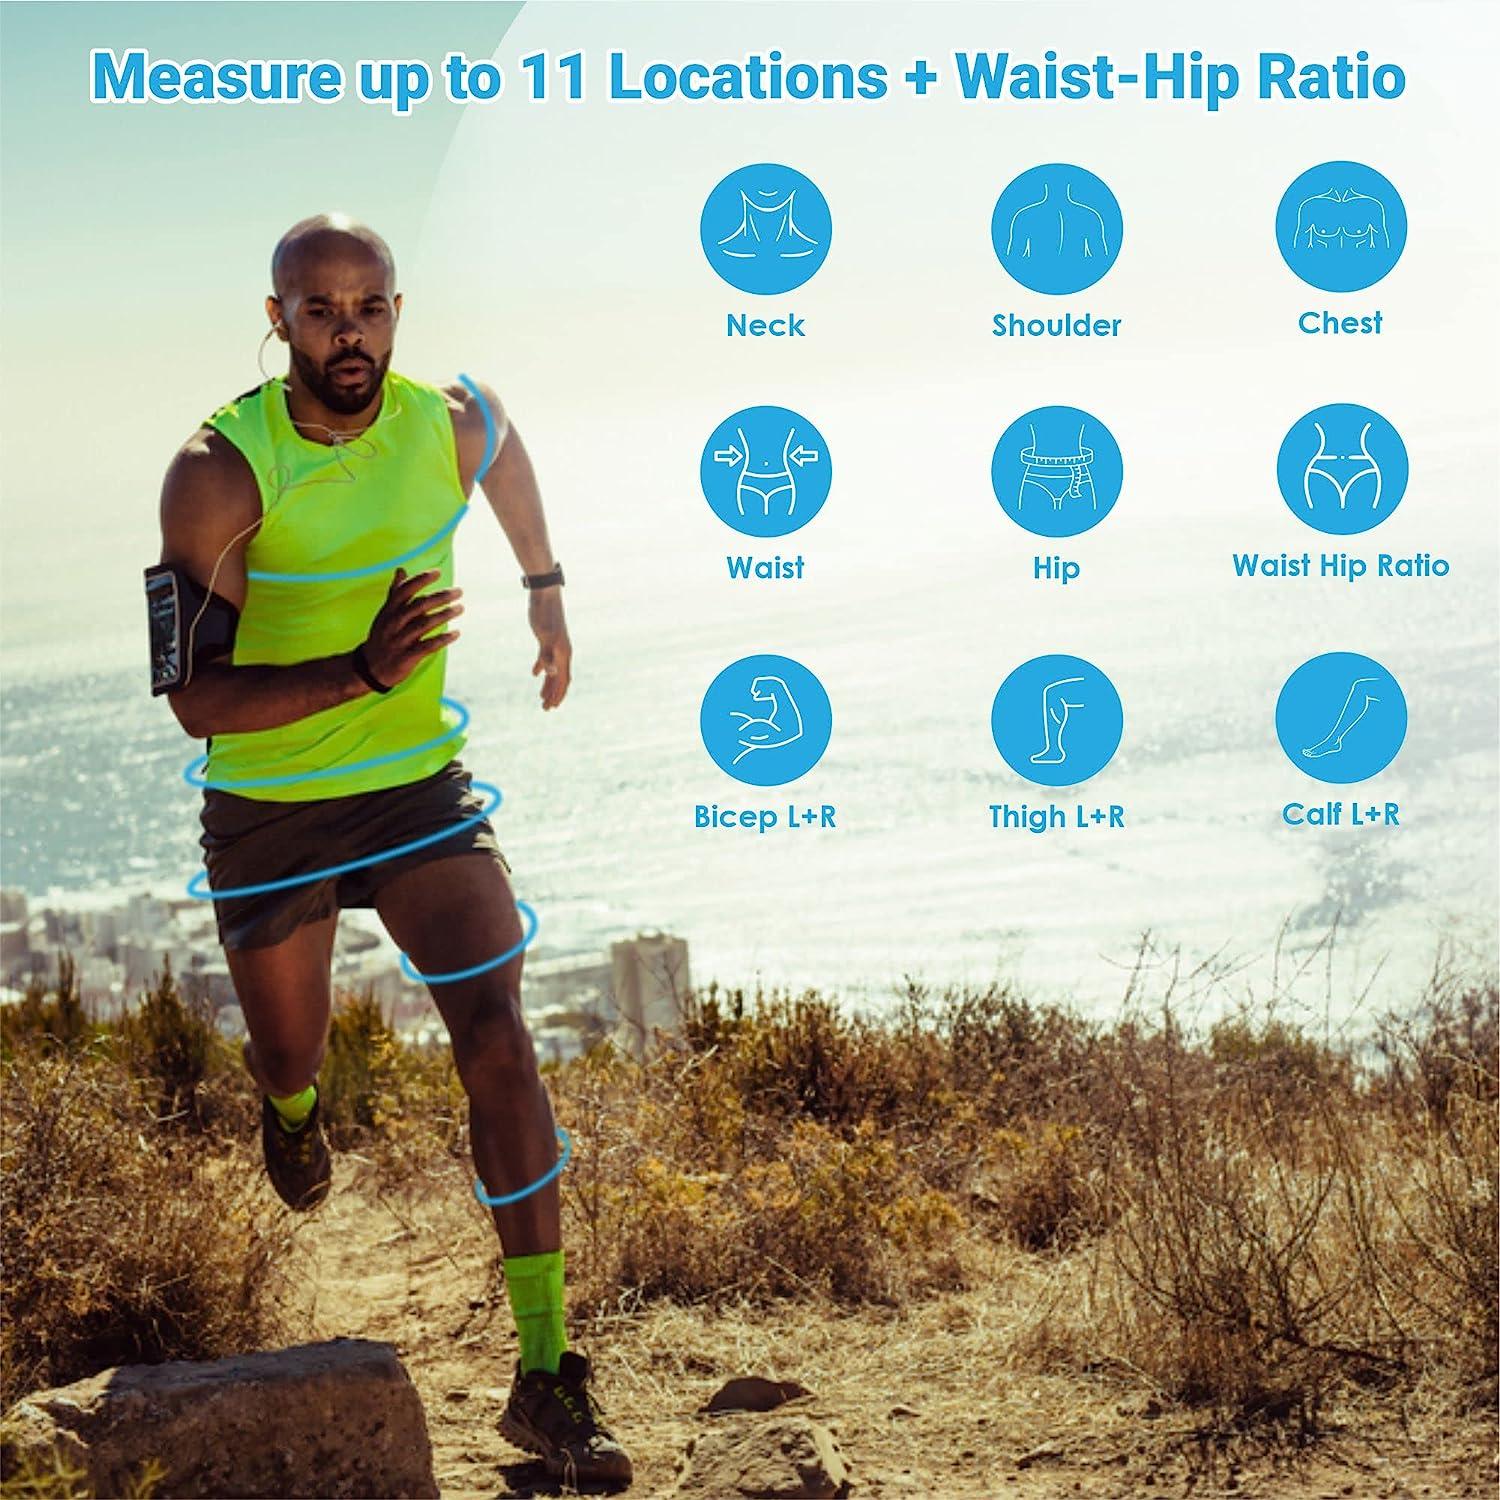  Lightstuff Digital Body Tape Measure - Smart Body Measuring  Tape with Phone App - Durable and Easy Bluetooth Body Measurement Tape -  Propel Your Success by Visually Tracking Muscle Gain, Fat